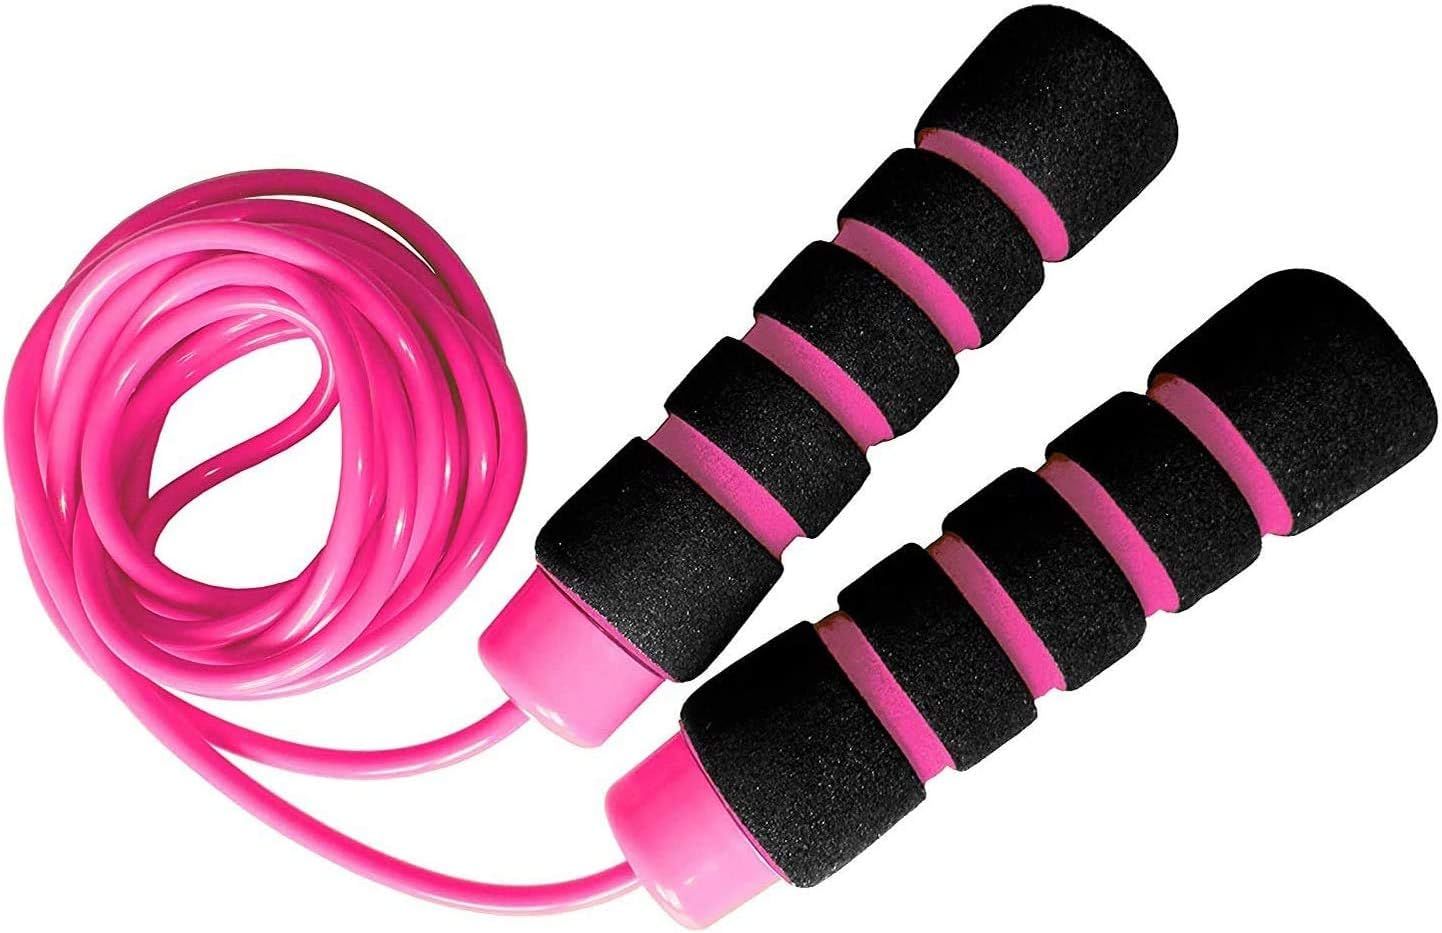 Limm Adjustable Jump Rope for Workout - All-Purpose Jump Rope Kids and Adults Love, Tangle-Free, ... | Amazon (US)